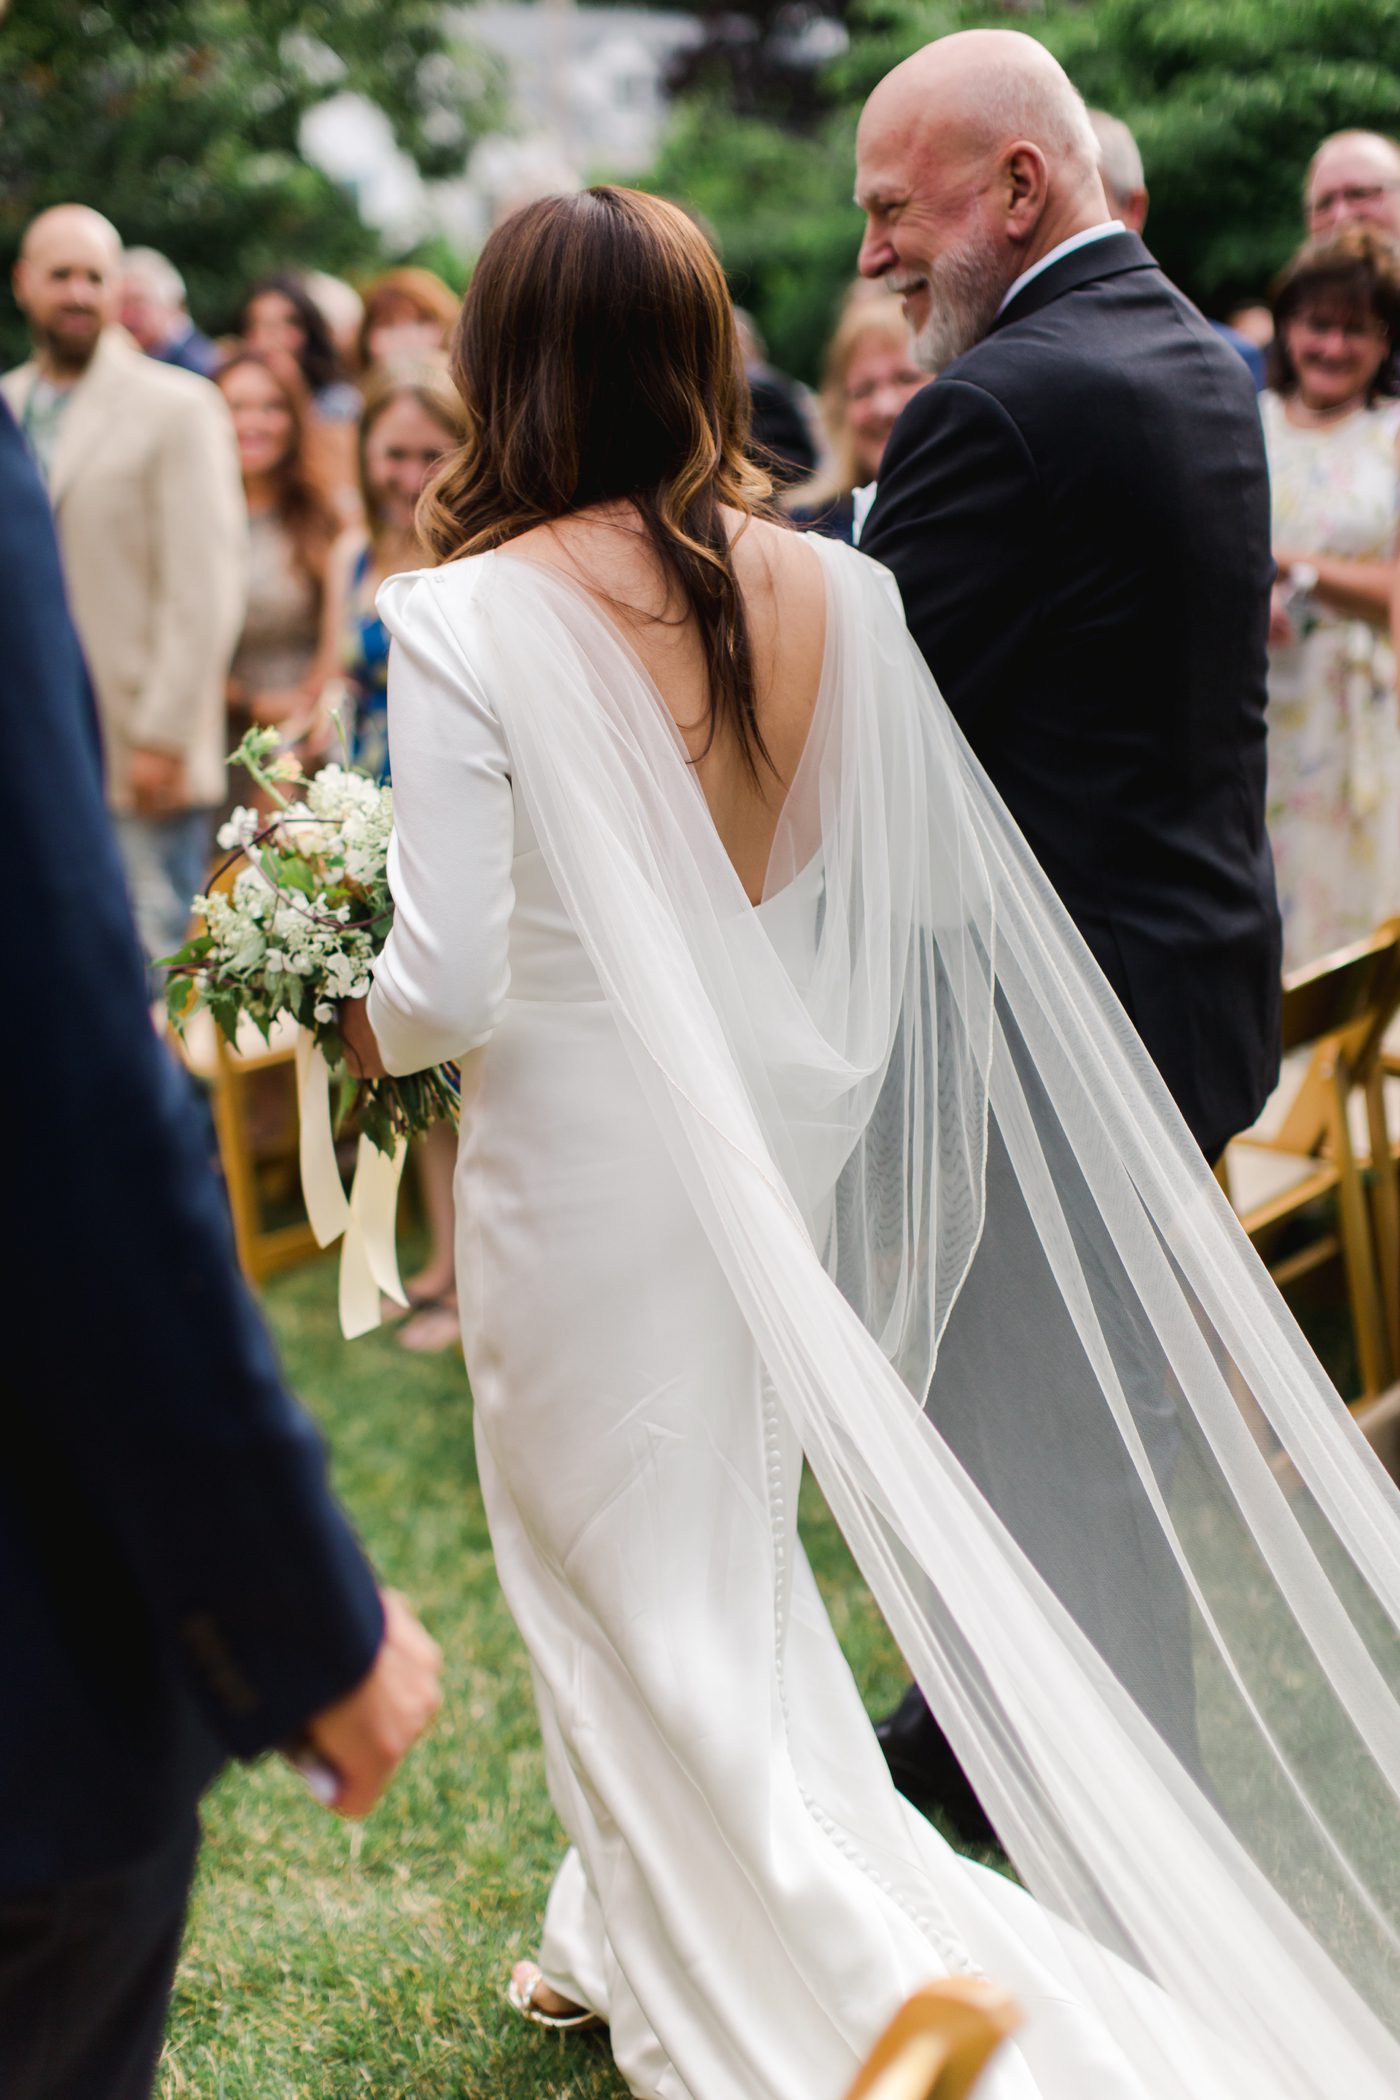 Bride walking down the aisle with her tulle cape flowing behind